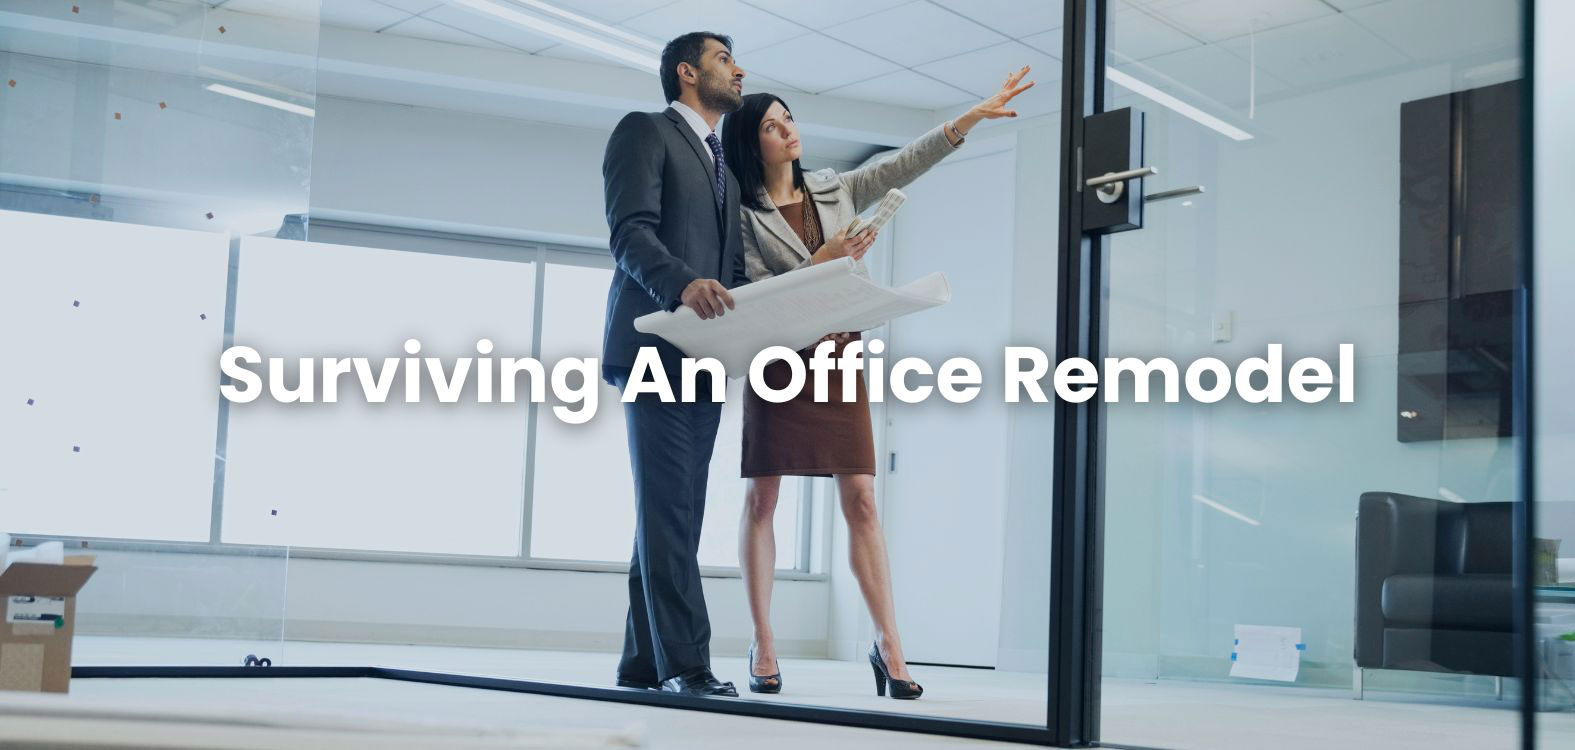 Surviving an office remodel